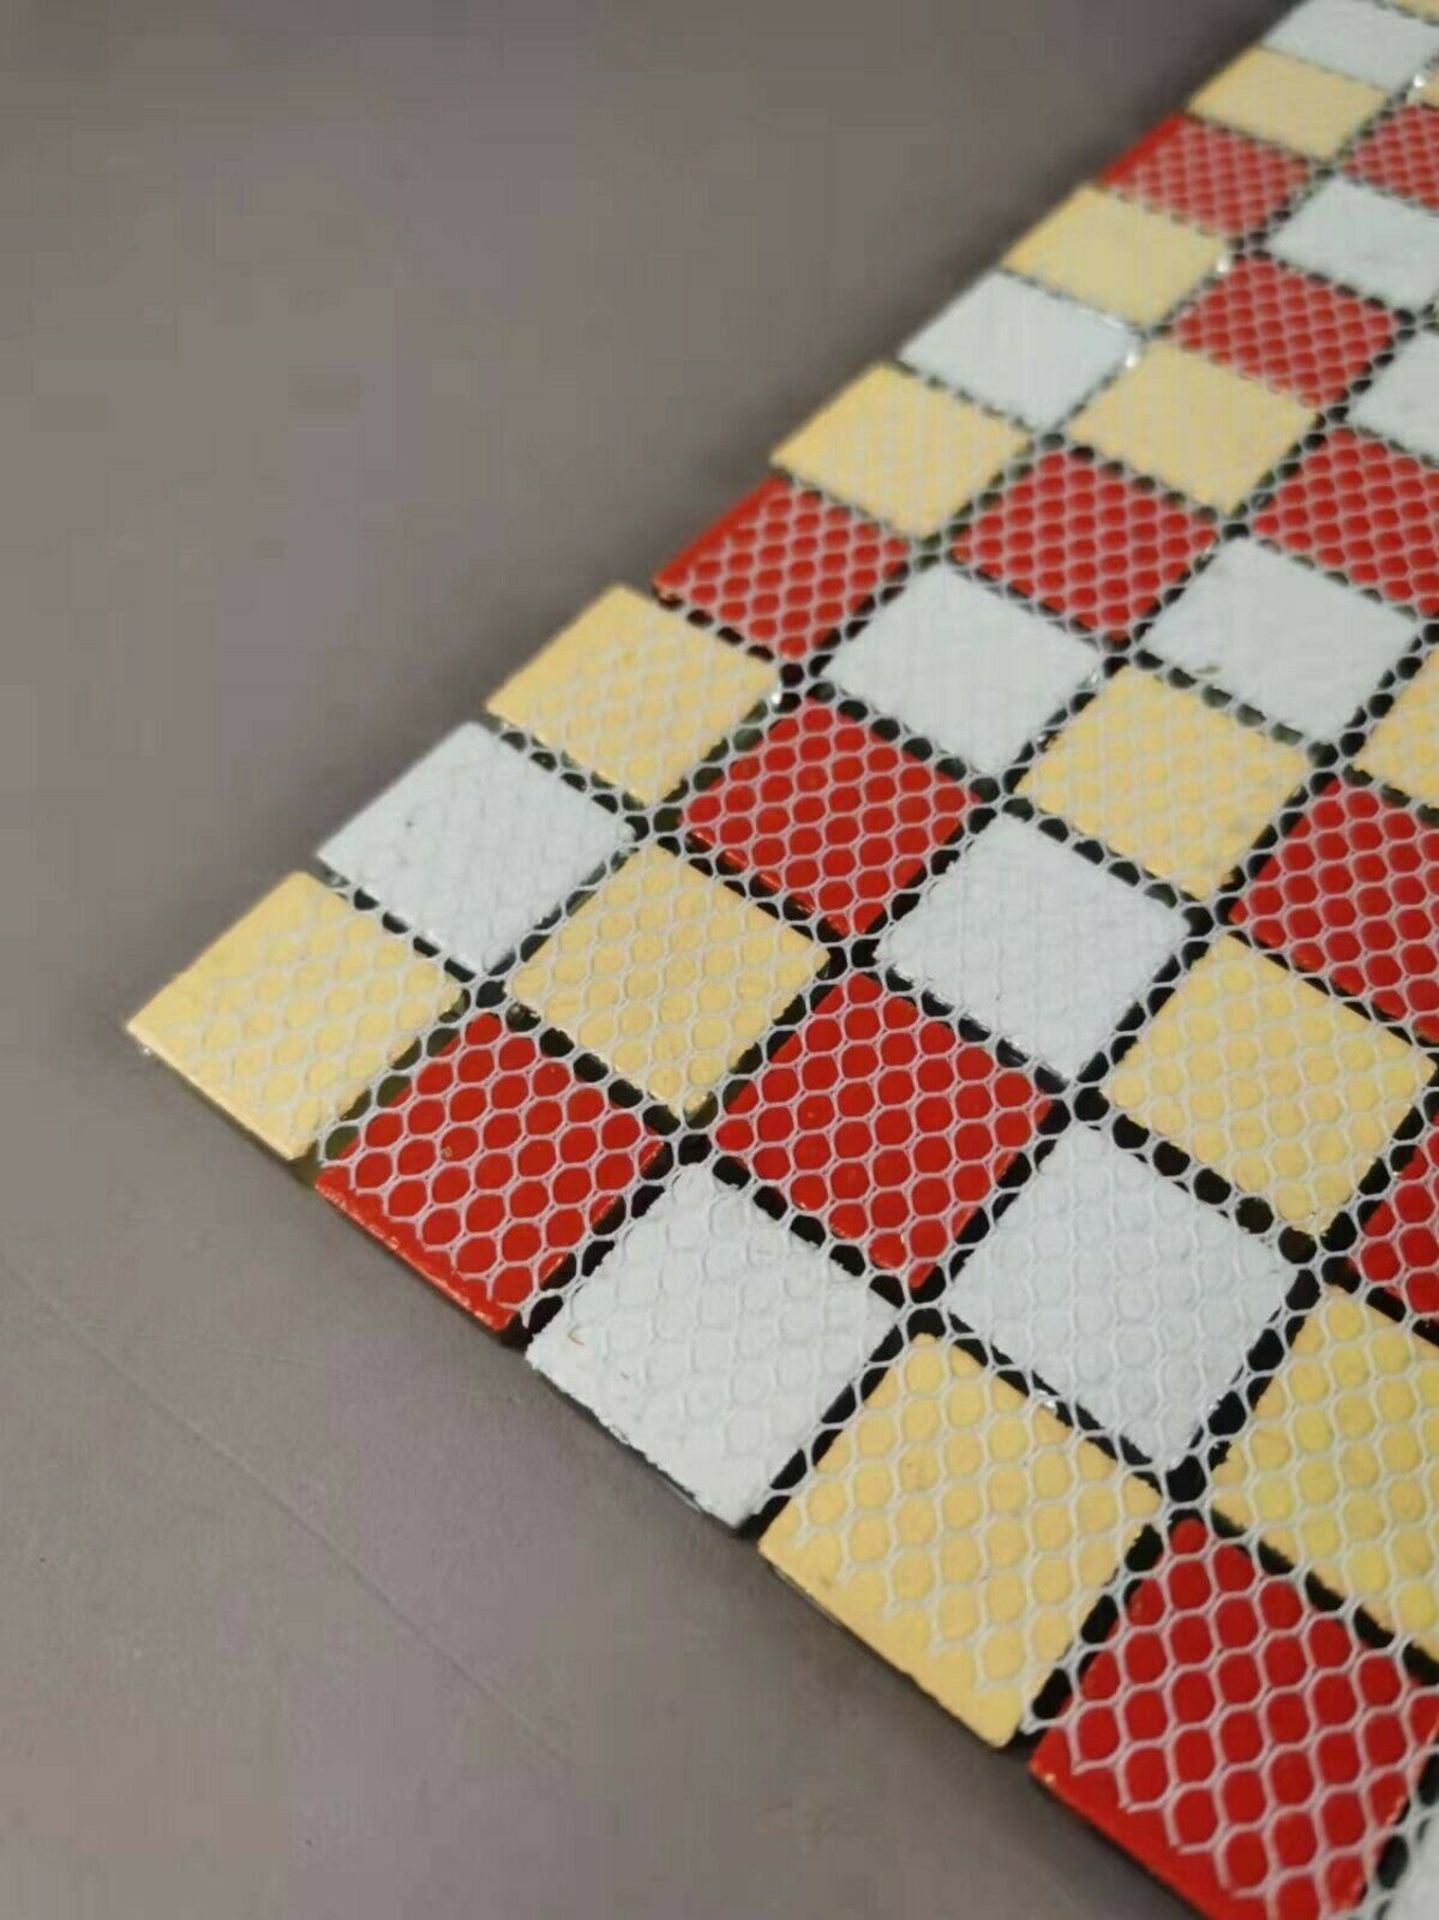 2 Square Metres - High Quality Glass/Stainless Steel Mosaic Tiles - Image 4 of 4